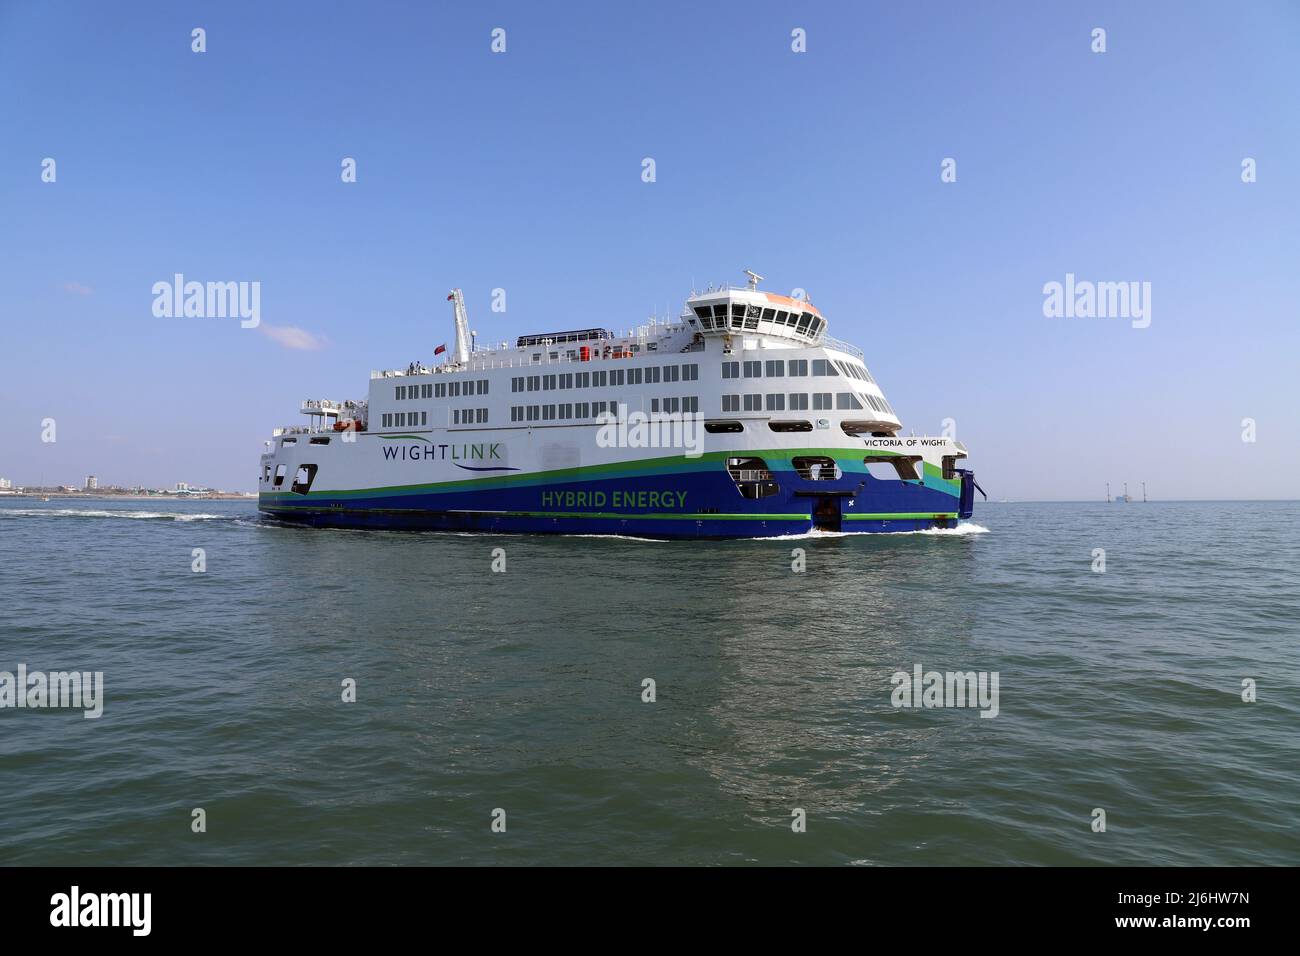 Victoria of Wight, a Wight Link Ferry on the in the Swashway heading for Fishbourne on the Isle of Wight Stock Photo